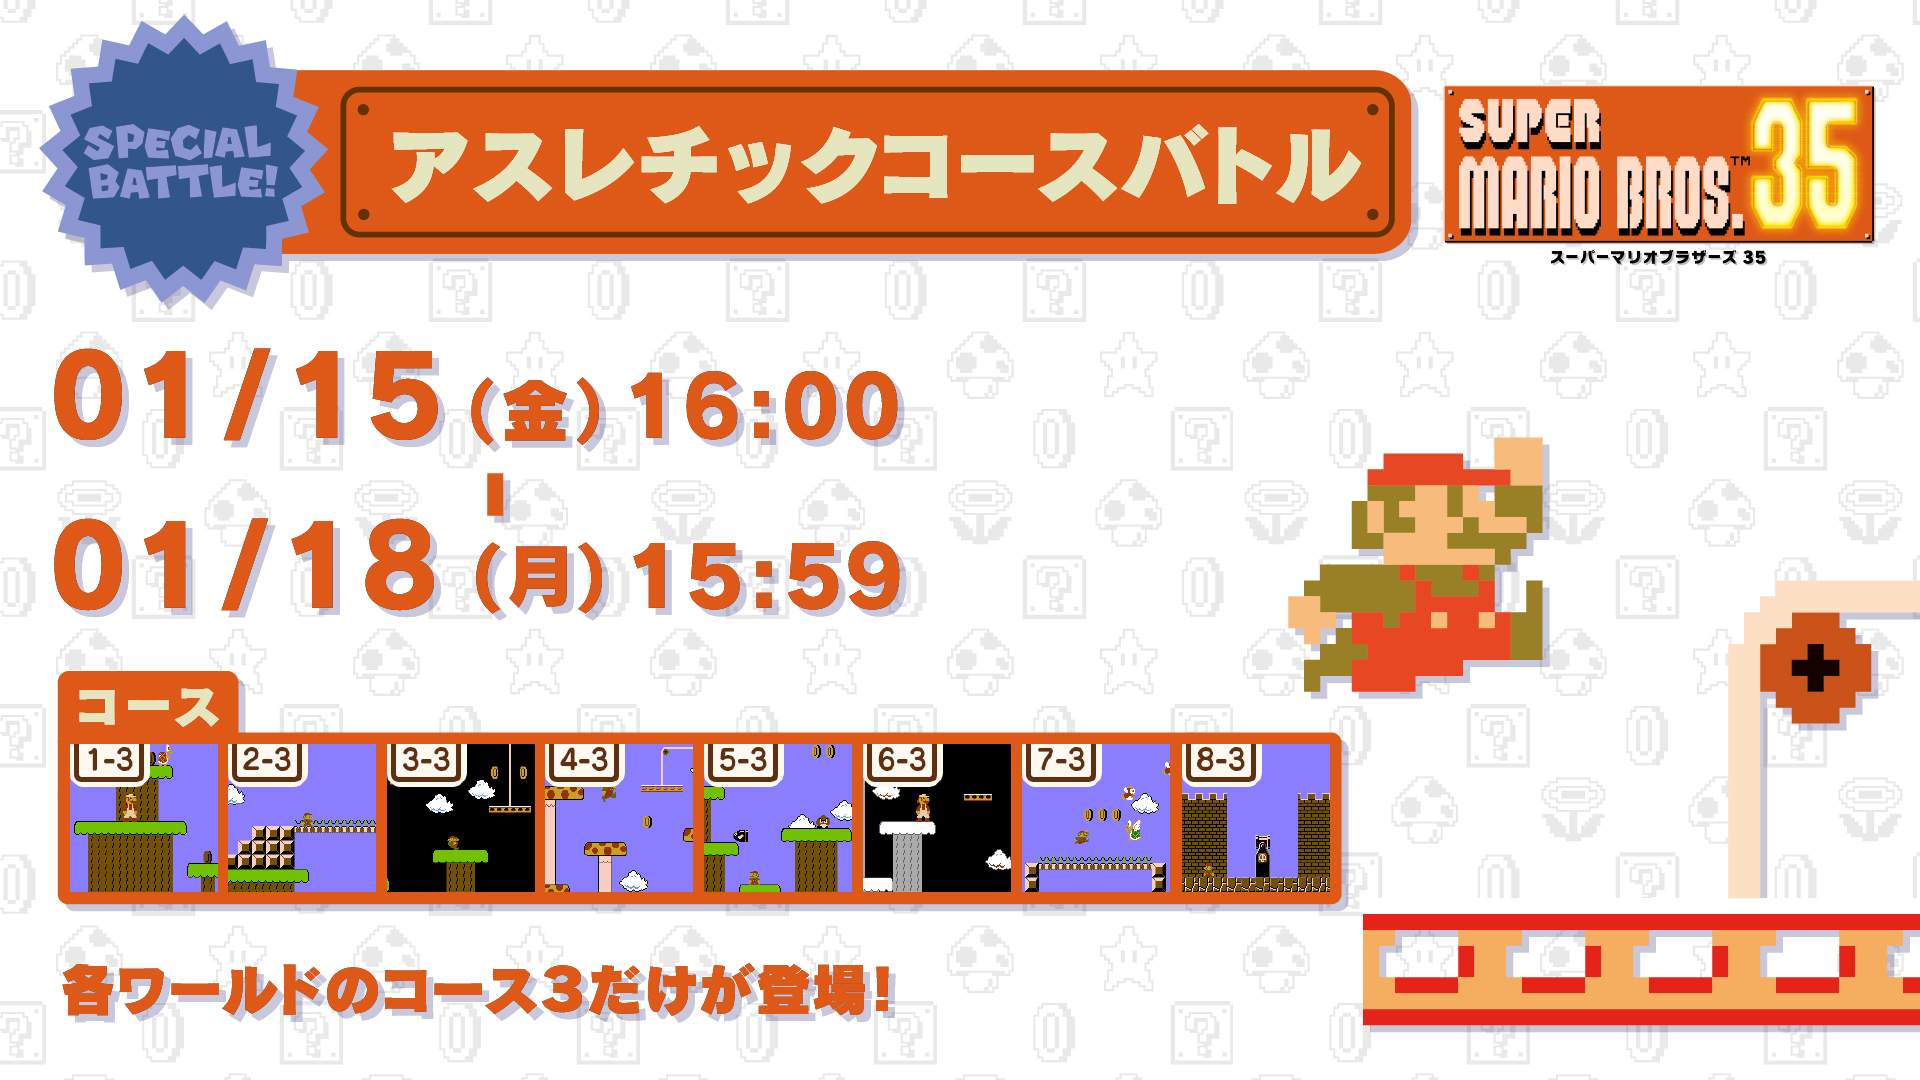 Super Mario Bros 35 New Special Battle Event Announced For January 15 Nintendo Everything